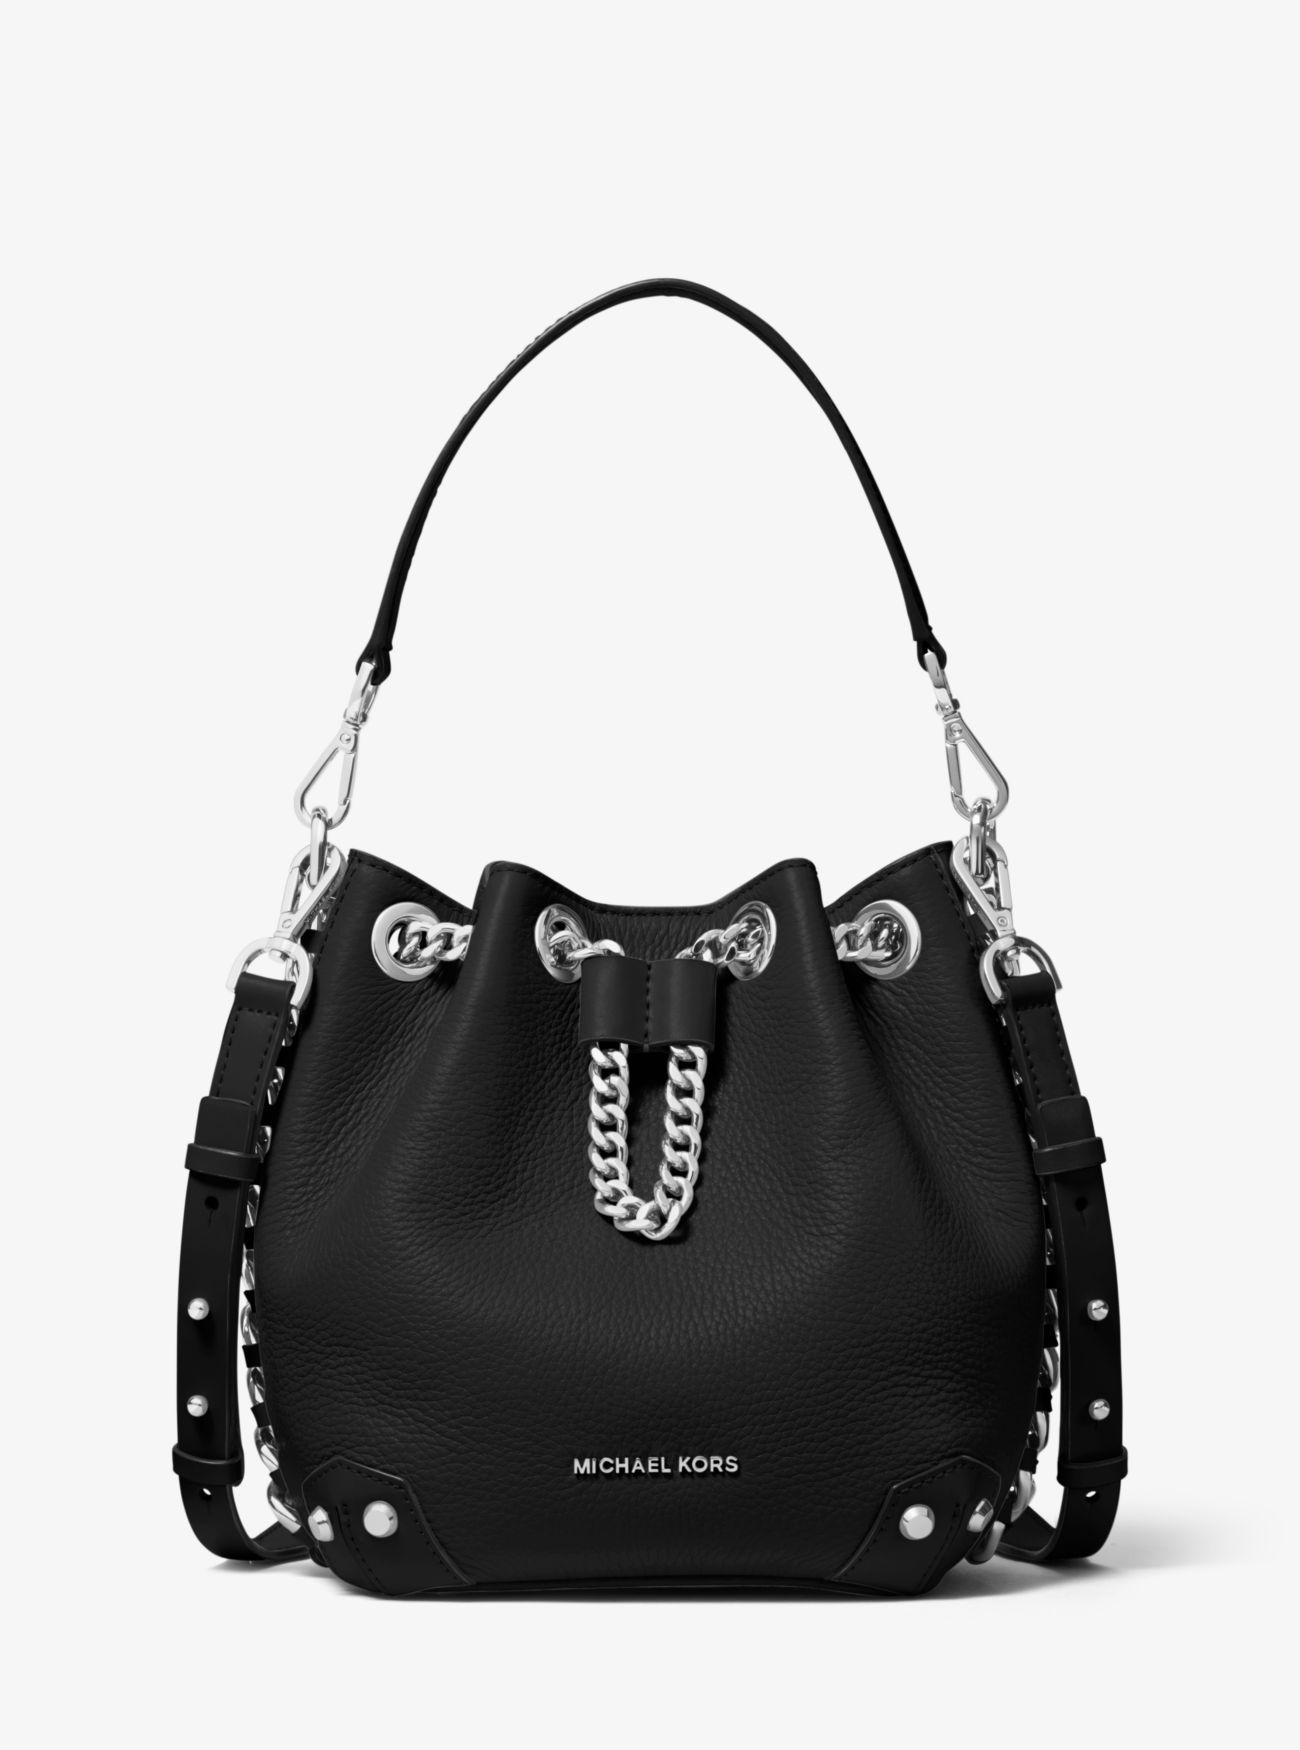 MICHAEL Michael Kors Leather Alanis Small Bucket Bag in Black/Silver (Black)  - Lyst